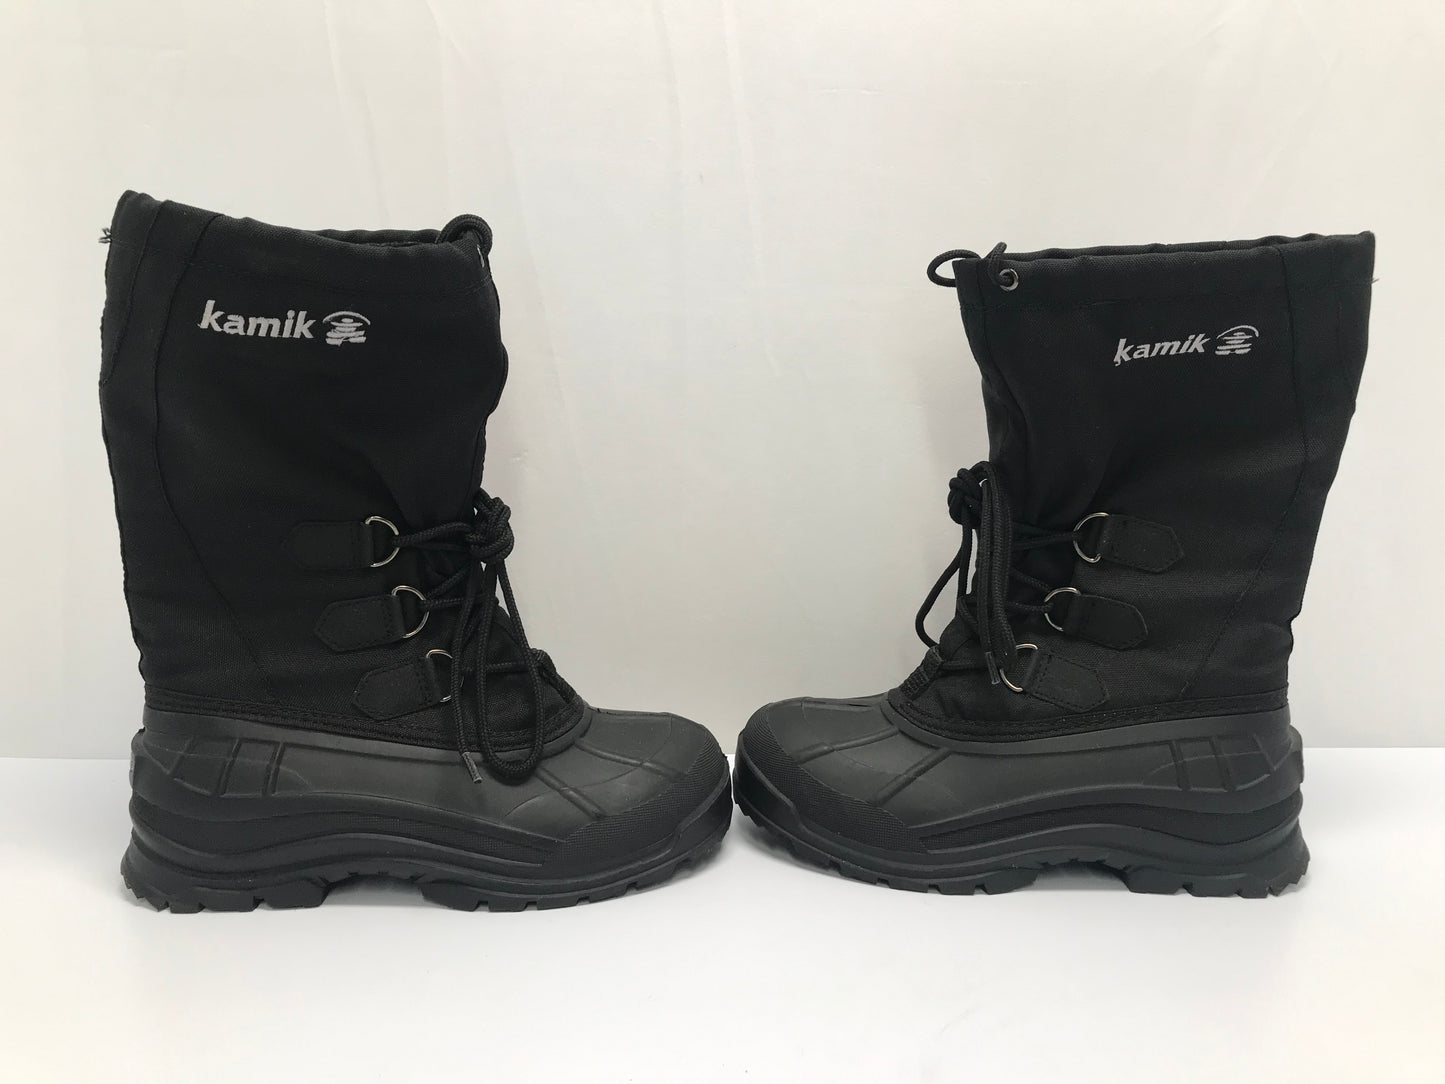 Winter Boots Ladies Size 8 Kamik Black With Liners New Demo Model